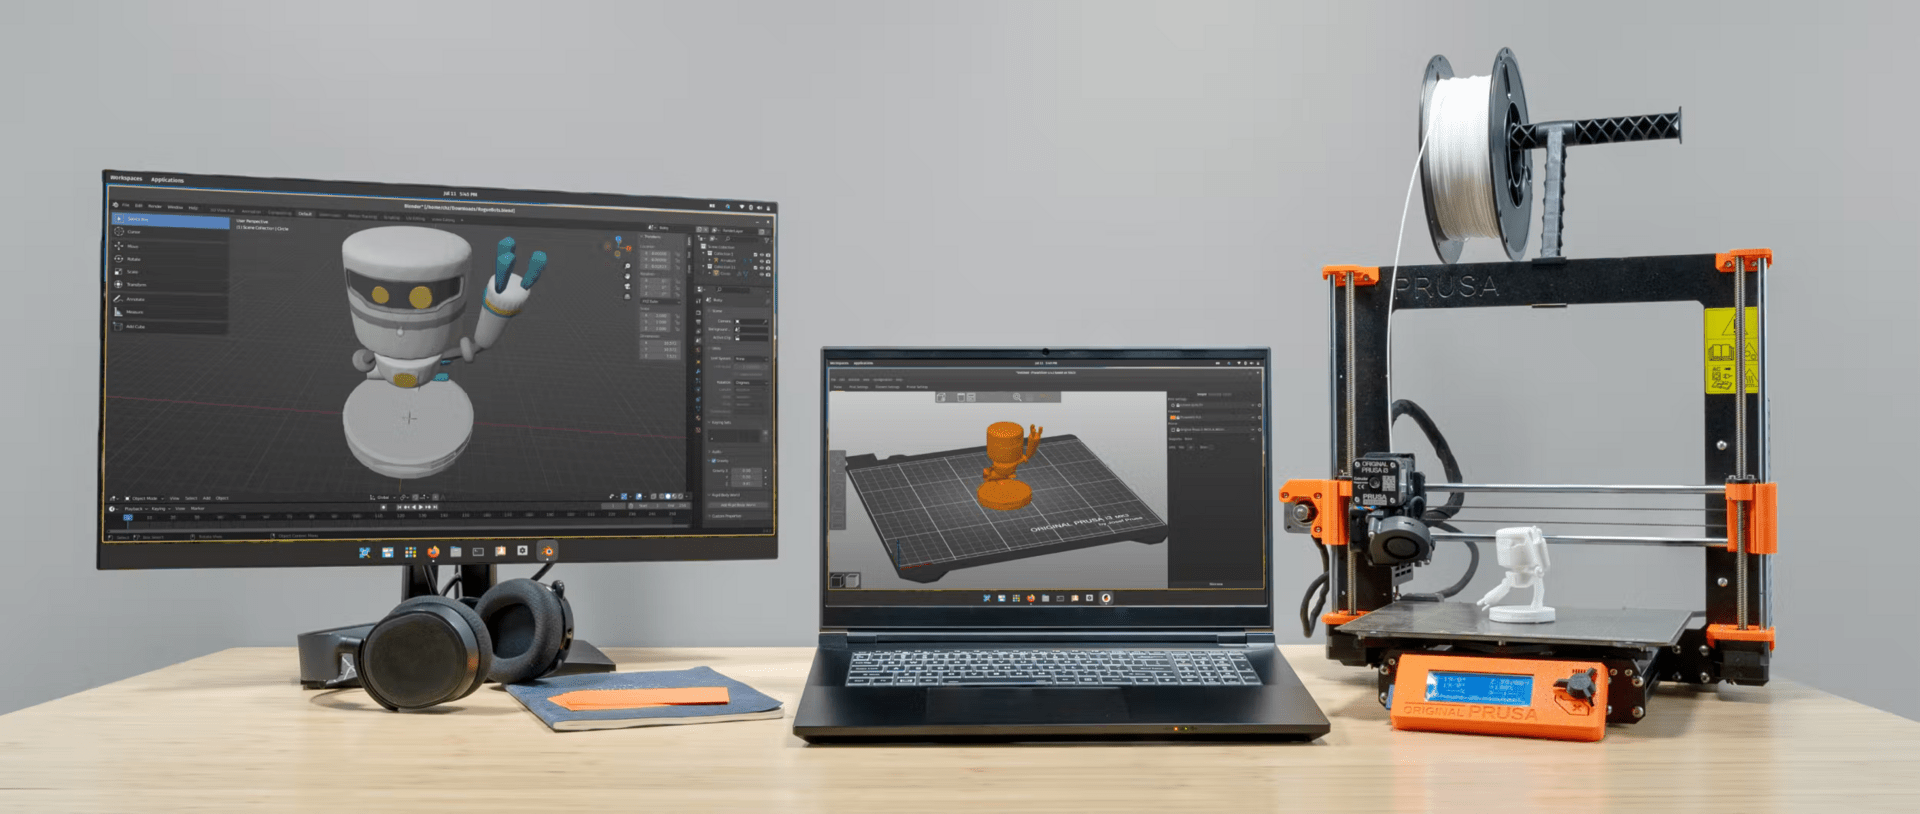 The System76 Oryx Pro is designed to be a workhorse